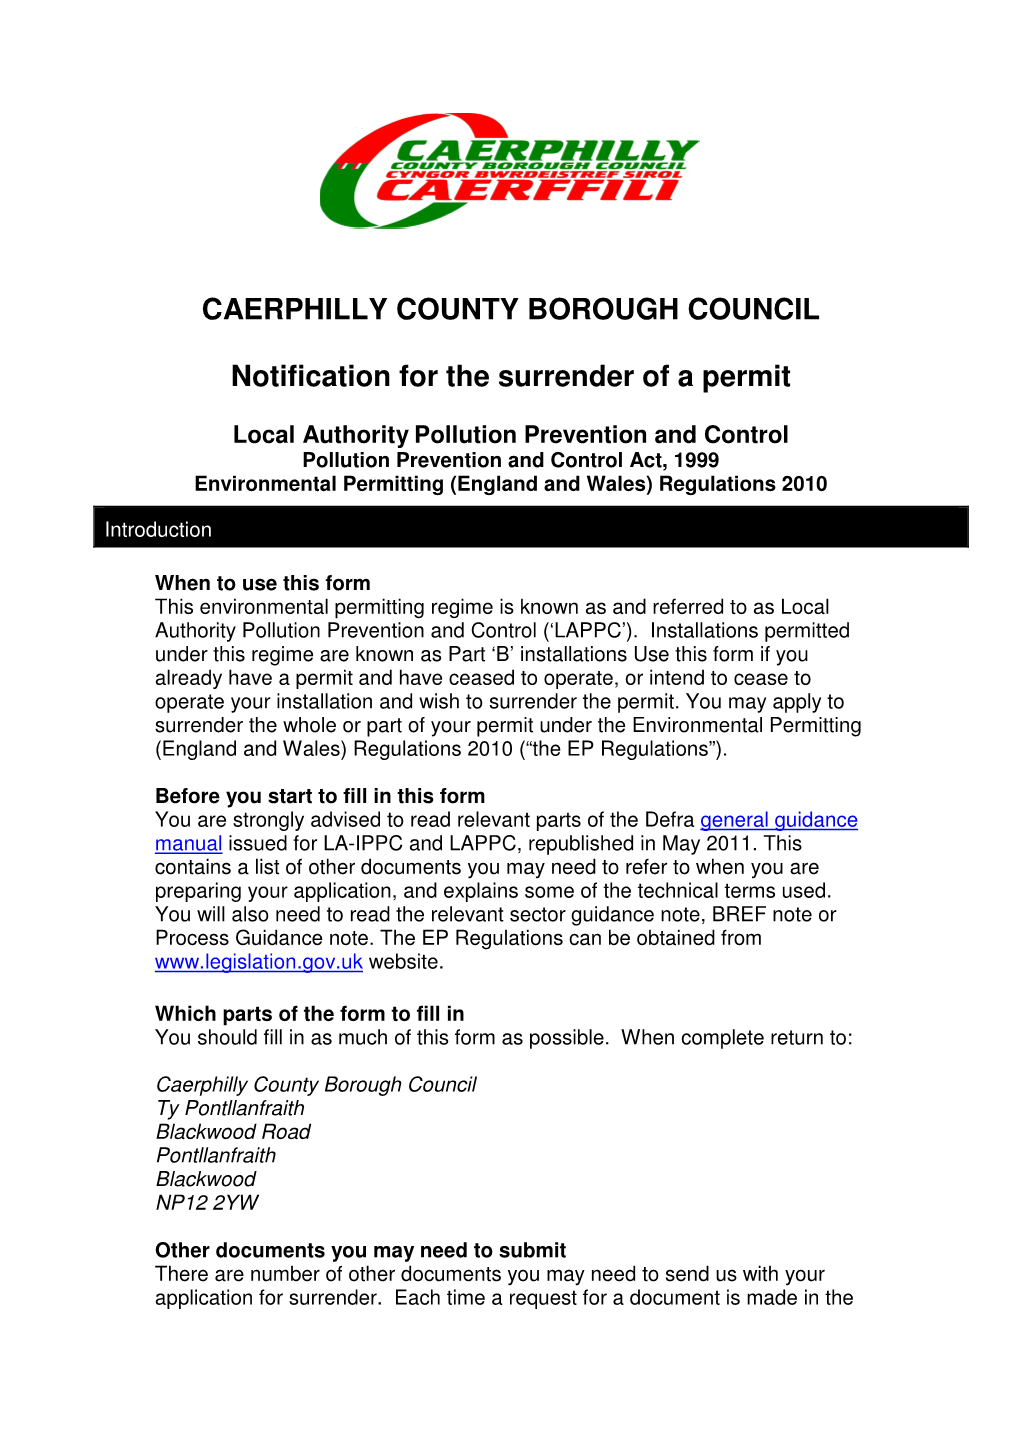 CAERPHILLY COUNTY BOROUGH COUNCIL Notification for The